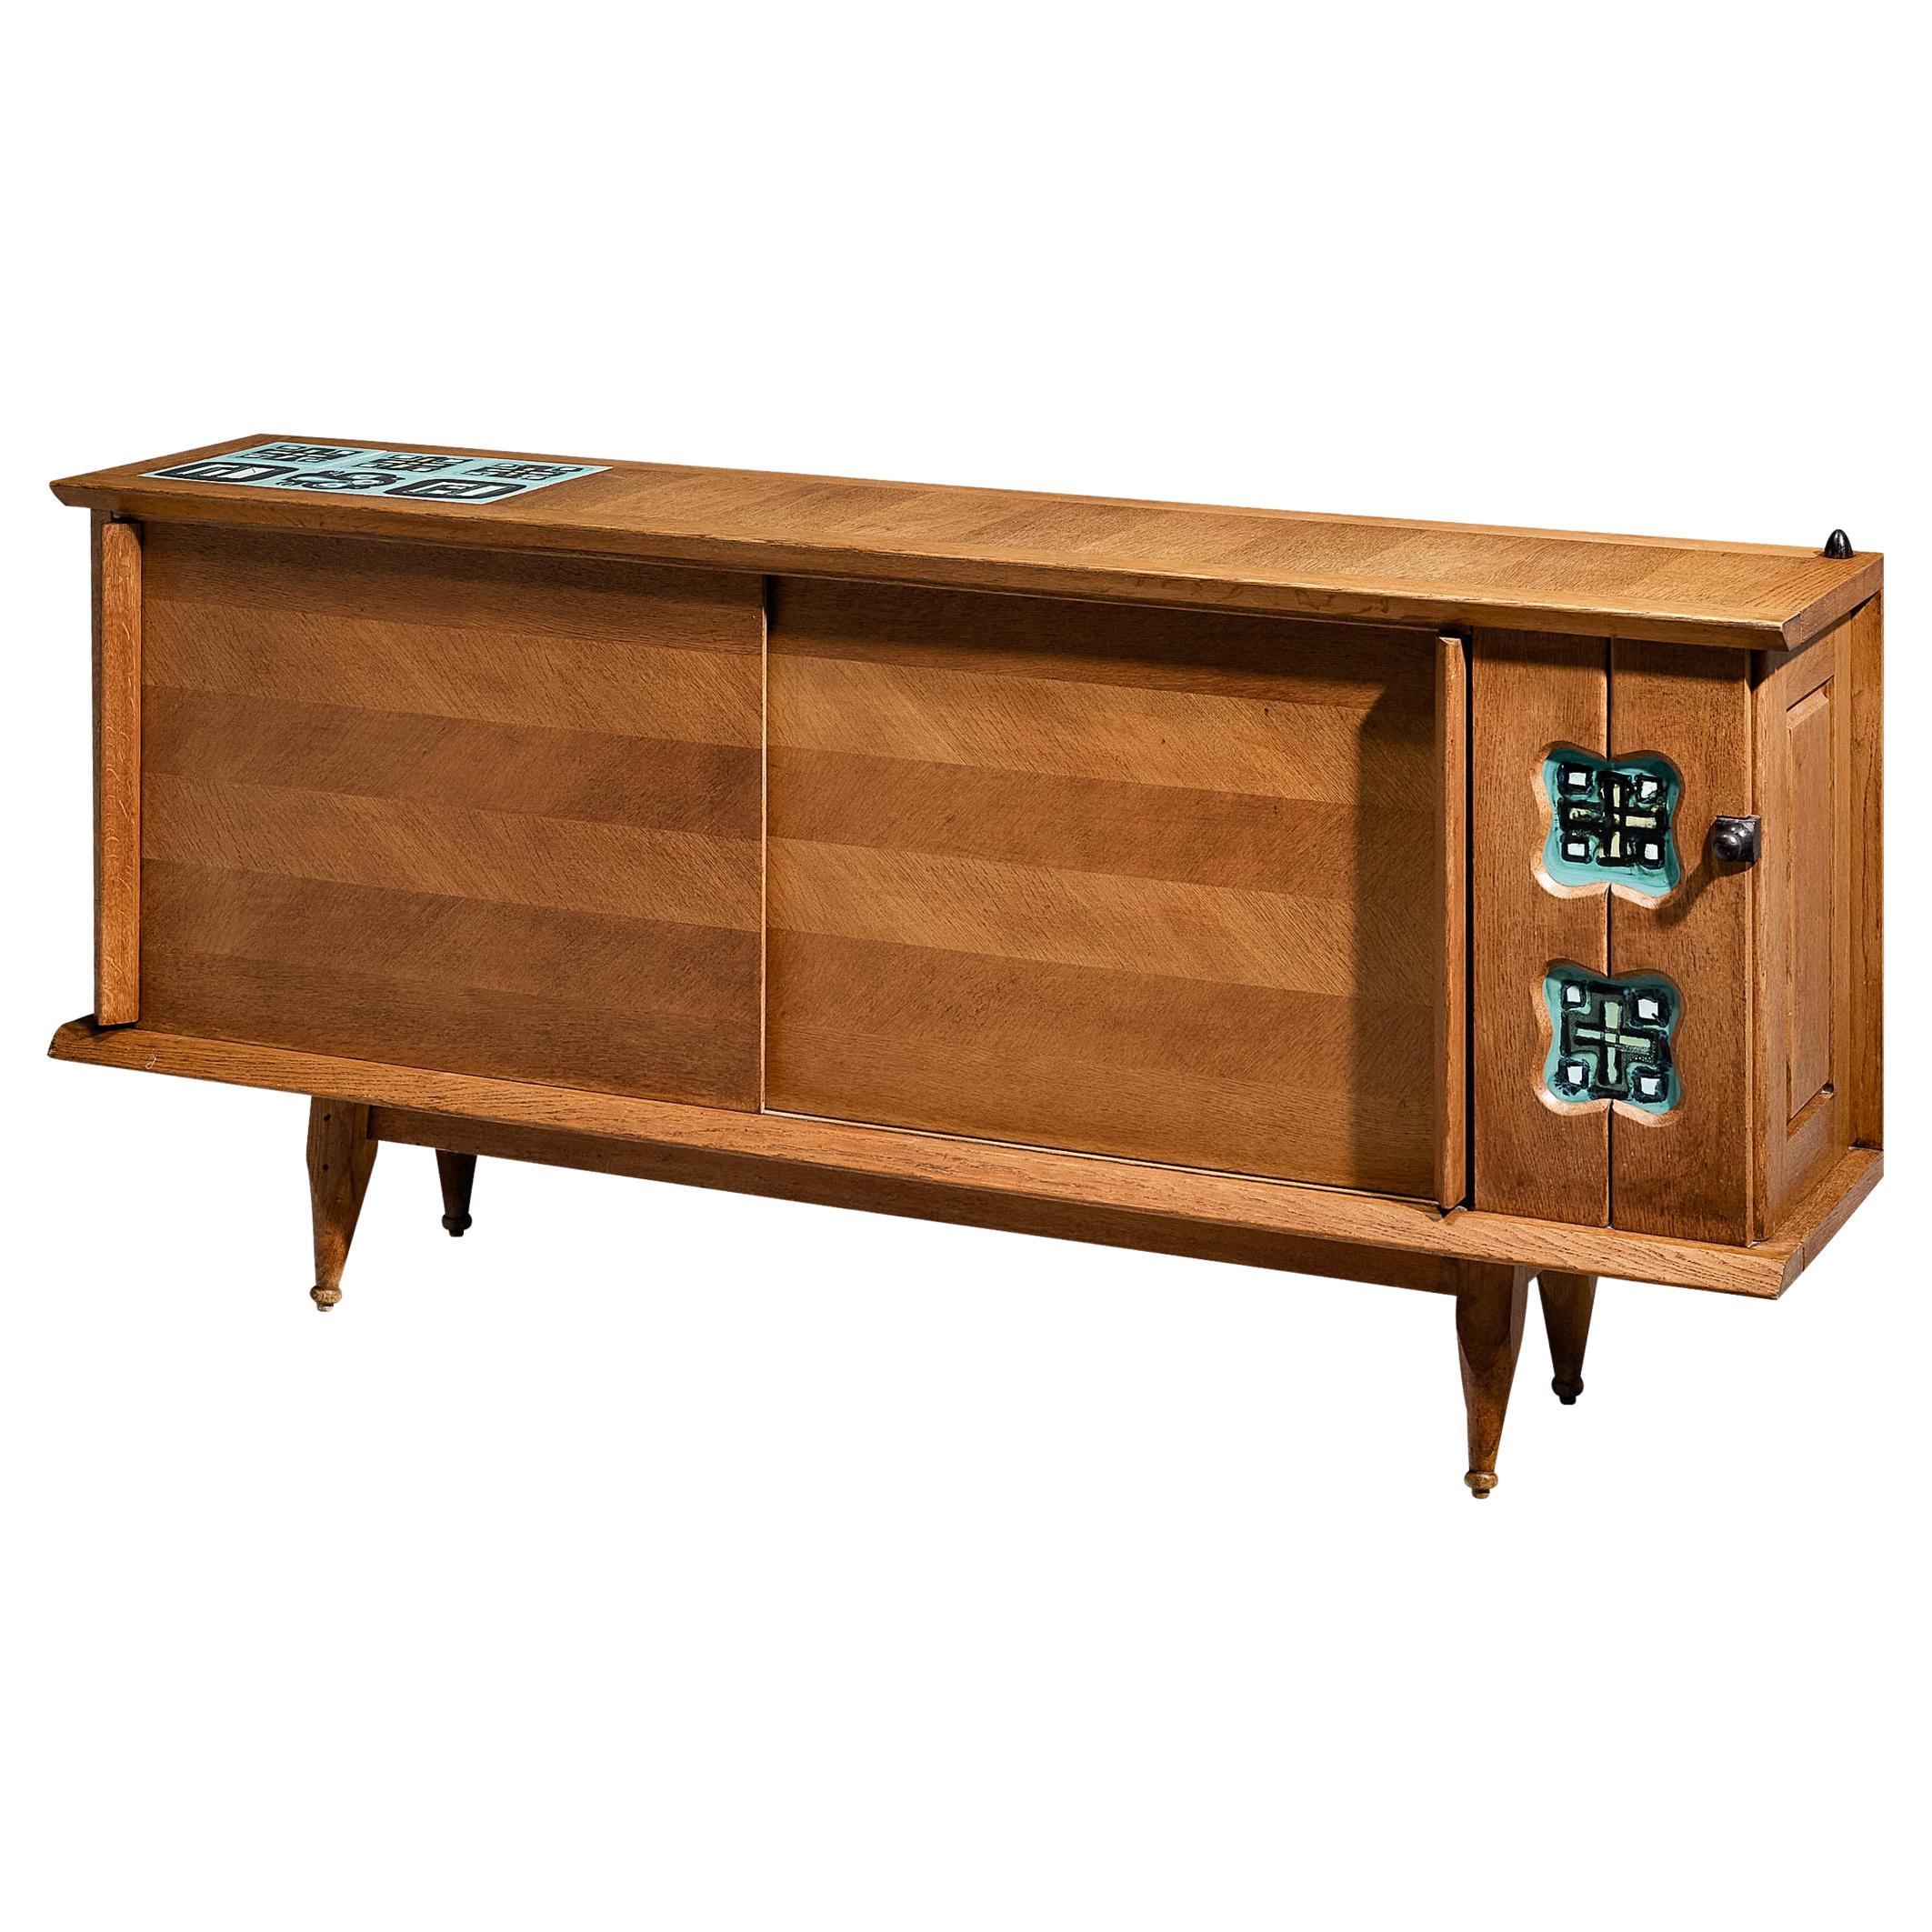 Guillerme & Chambron Sideboard in Oak with Ceramic Tiles For Sale